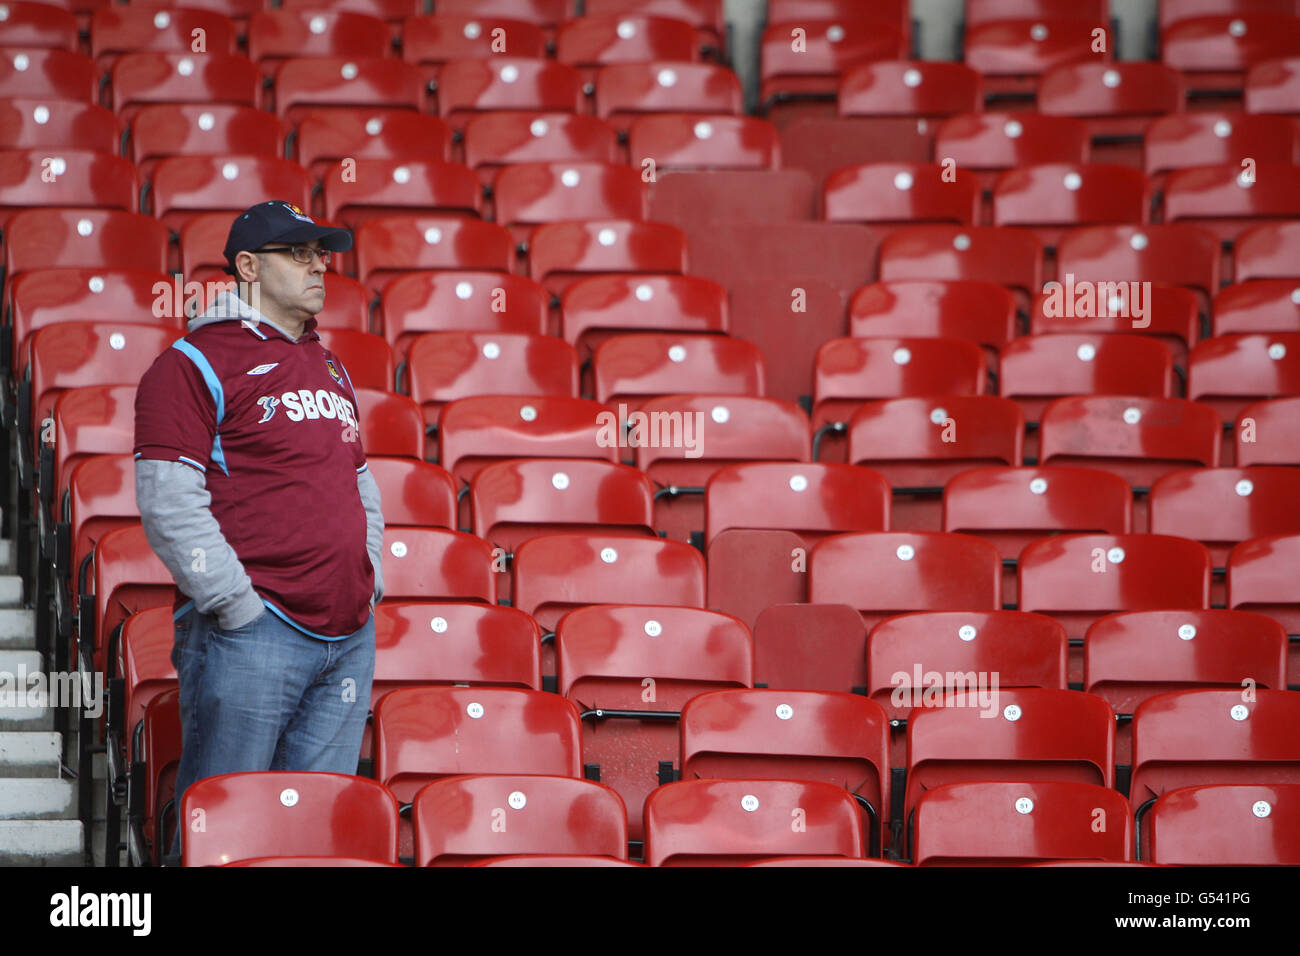 A West Ham United's fan show his dejection after 2.1 win over Hull City but knowing Southampton had gained automatic promotion during the npower Football League Championship match at Upton Park, London. Stock Photo